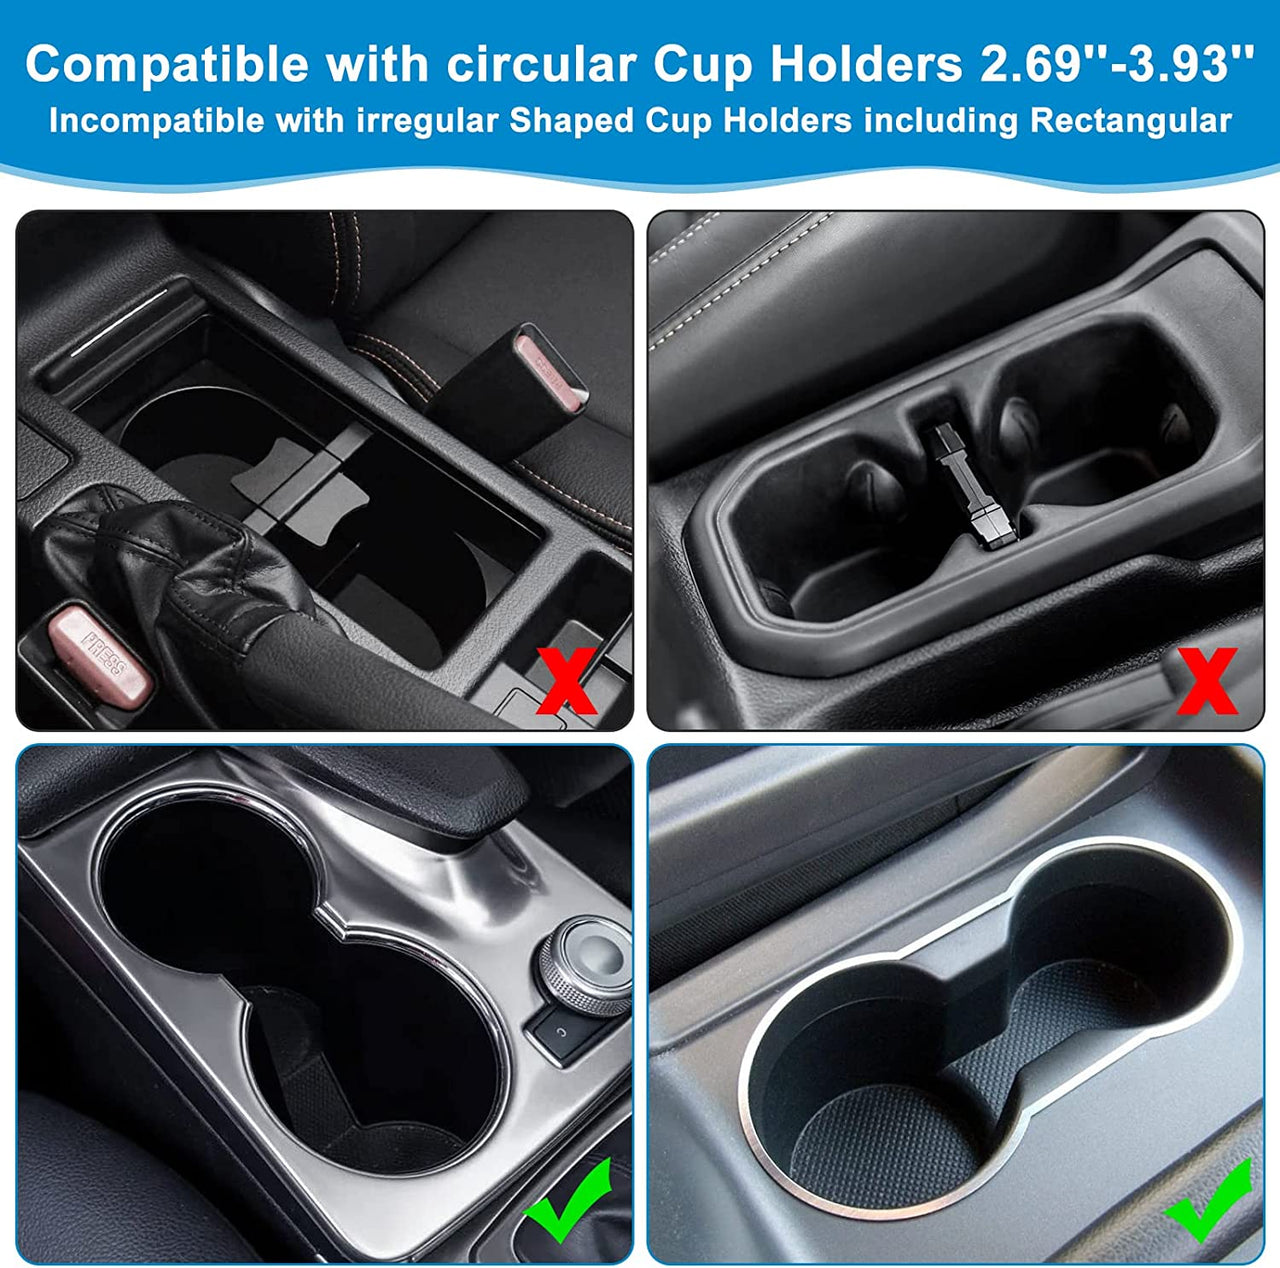 Car Cup Holder 2-in-1, Custom-Fit For Car, Car Cup Holder Expander Adapter with Adjustable Base, Car Cup Holder Expander Organizer with Phone Holder WAVE233